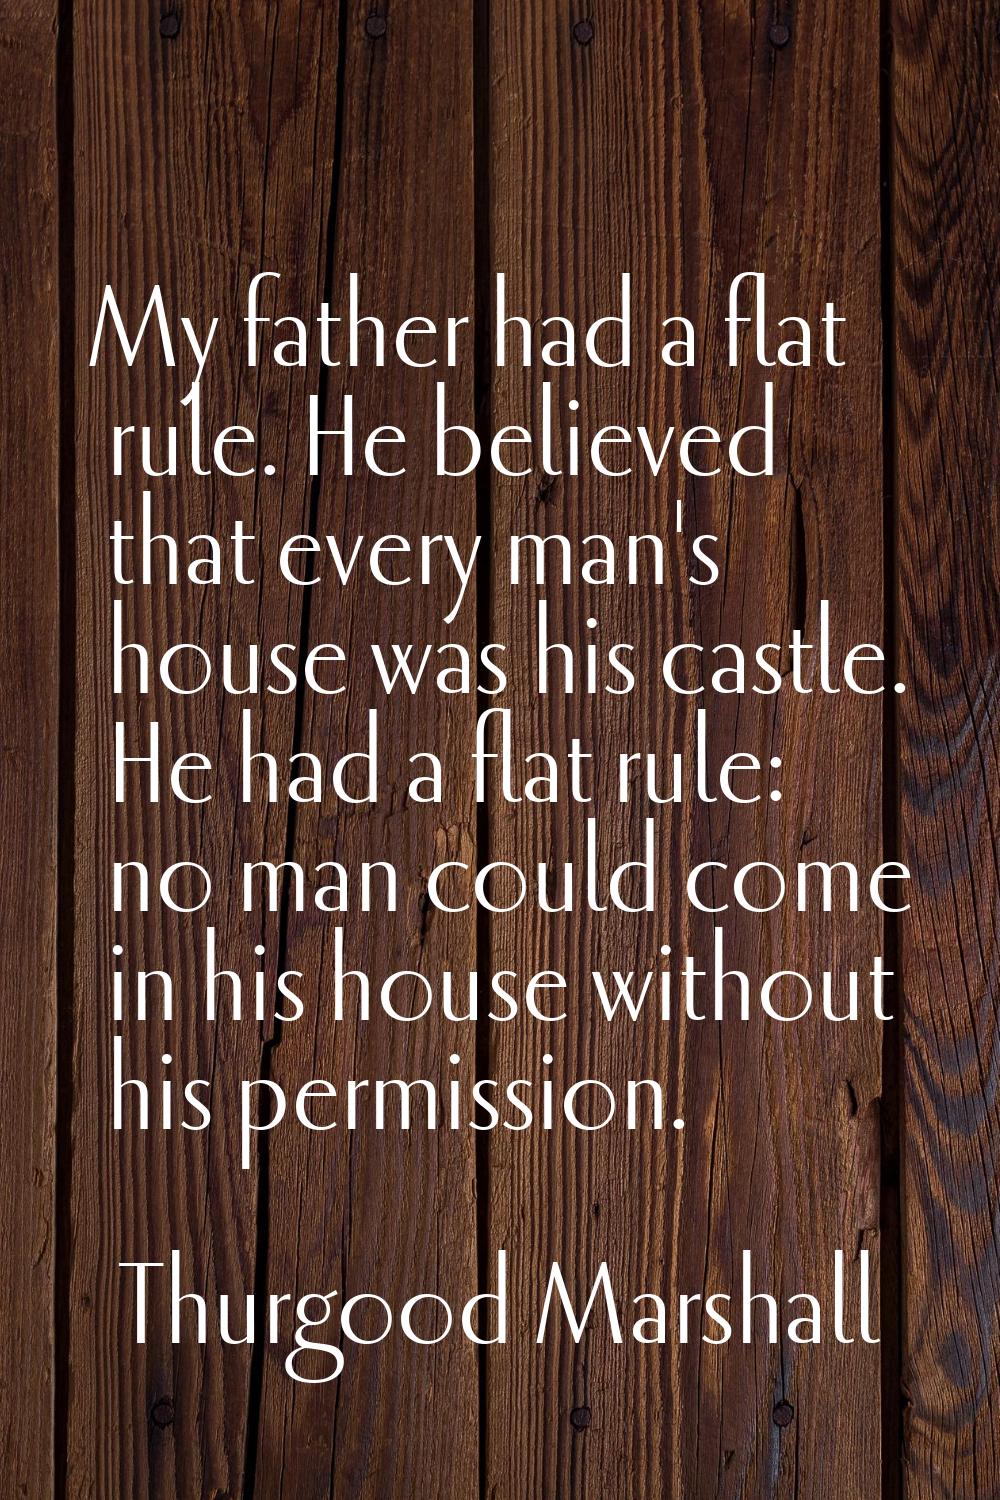 My father had a flat rule. He believed that every man's house was his castle. He had a flat rule: n